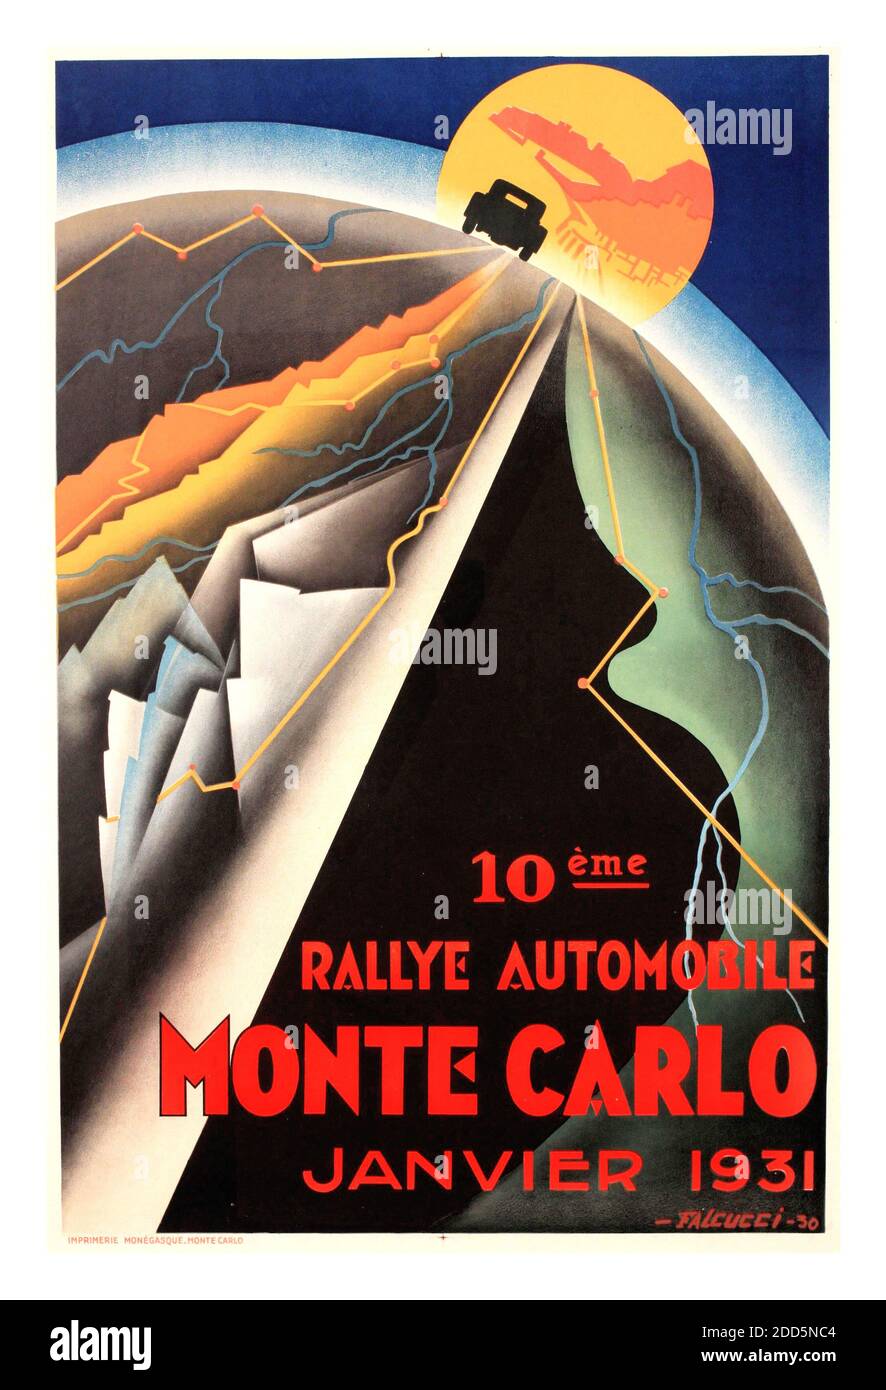 Vintage Monte Carlo Rallye - 1931,  poster printed by Imprimerie Monégasque Monte-Carlo 1931 -by Roberto Falcucci (1900-1989) Rallye Automobile de Monte-Carlo) is a rallying event organised each year by the Automobile Club de Monaco. Donald Healey won the 1931 event in an Invicta sports car Stock Photo